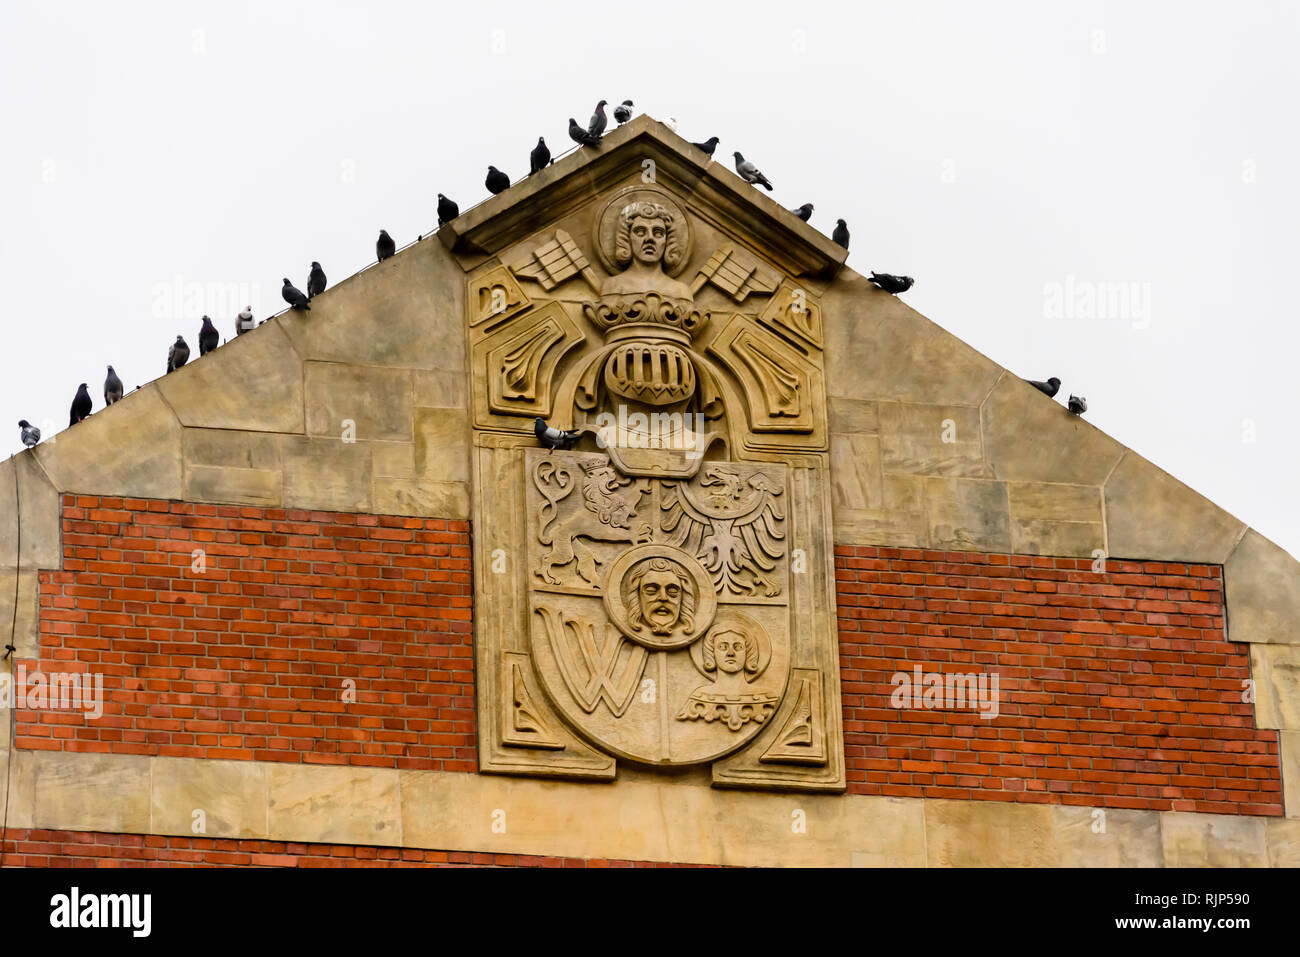 Woclaw coat of arms on the roof outside Hala Targowa indoor fruit and vegetable market, Wrocław, Wroclaw, Wroklaw, Poland Stock Photo